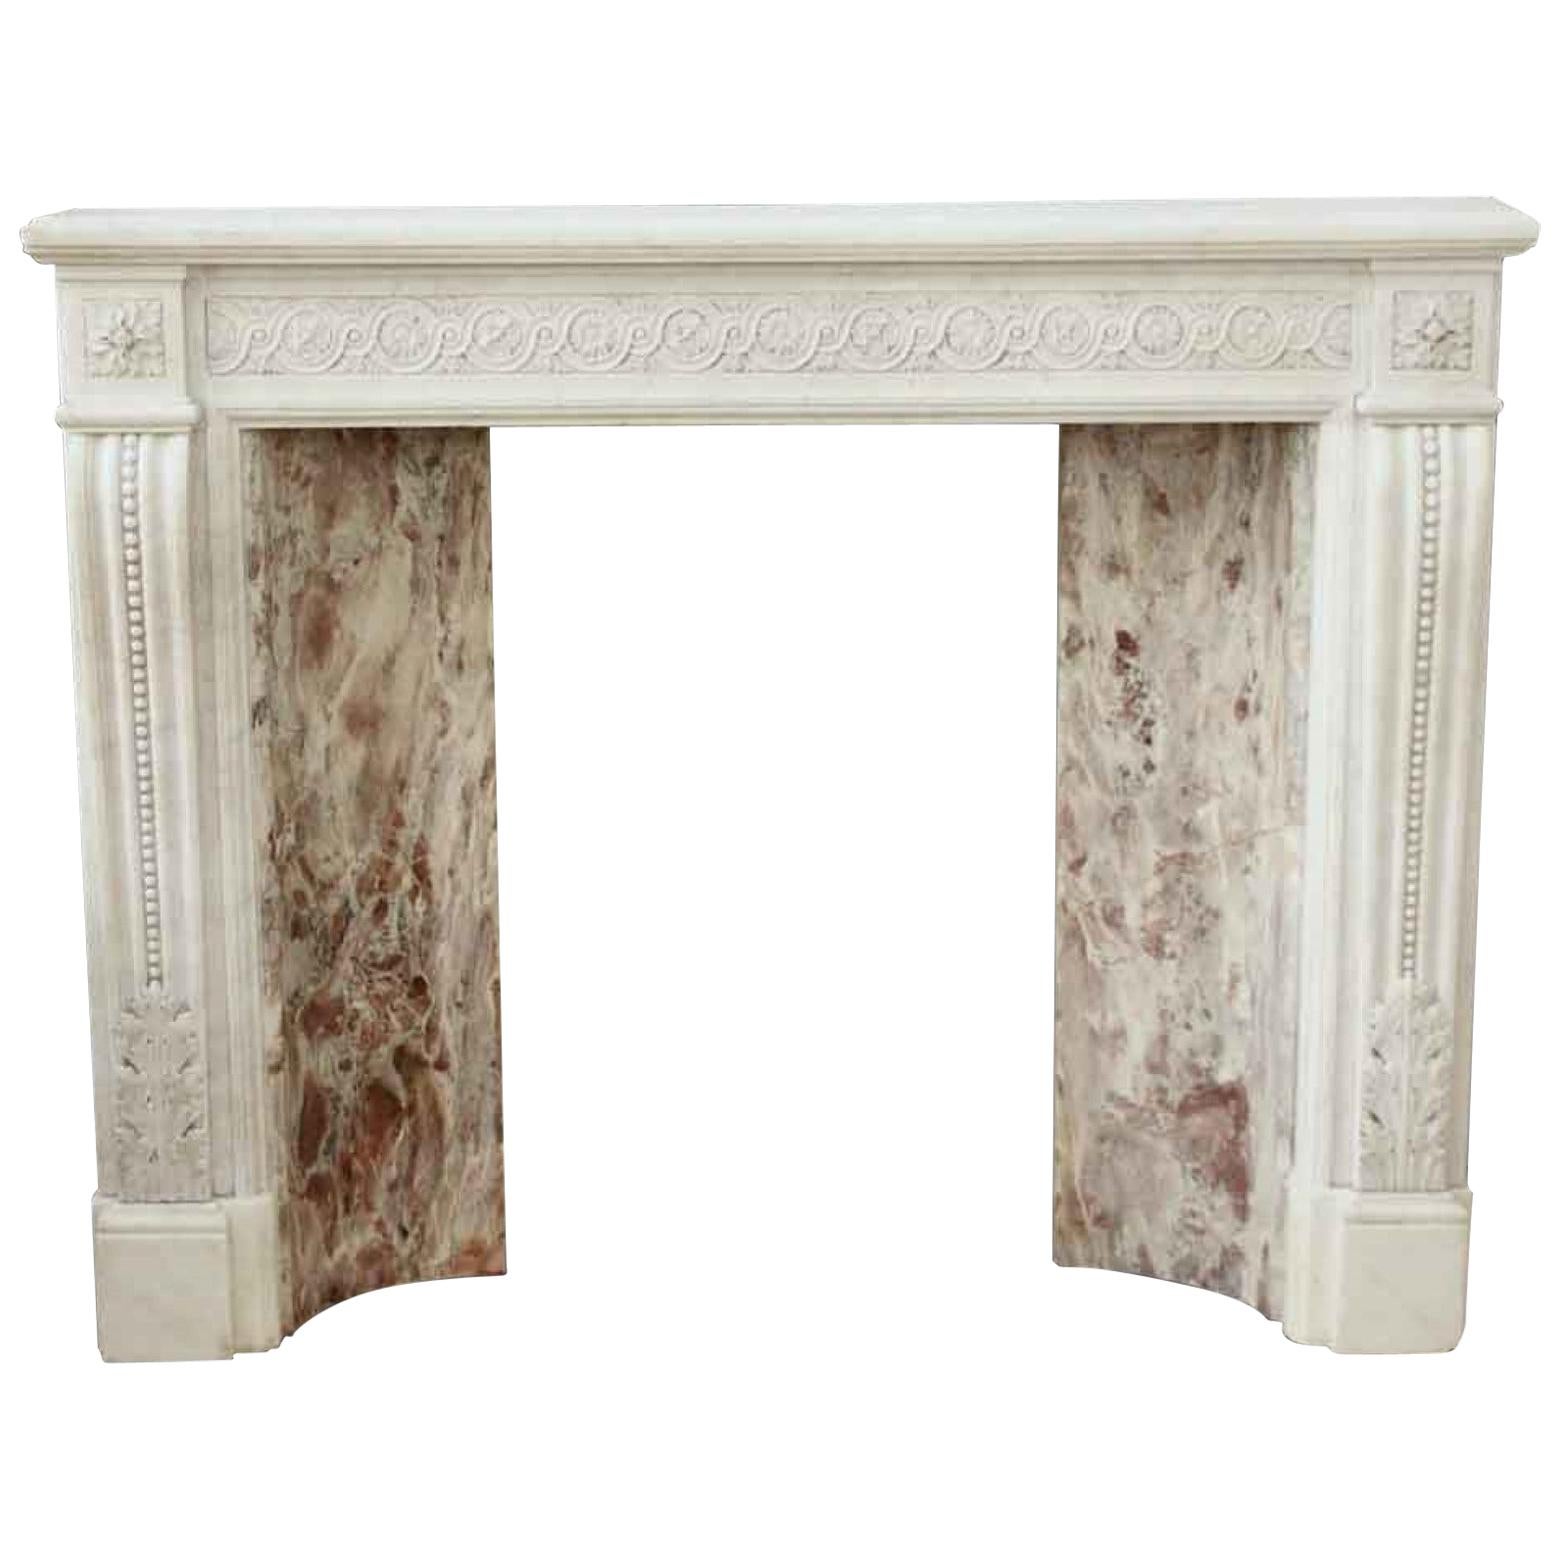 1880s Small Victorian White Carrara Marble Mantel Hand Carved Details